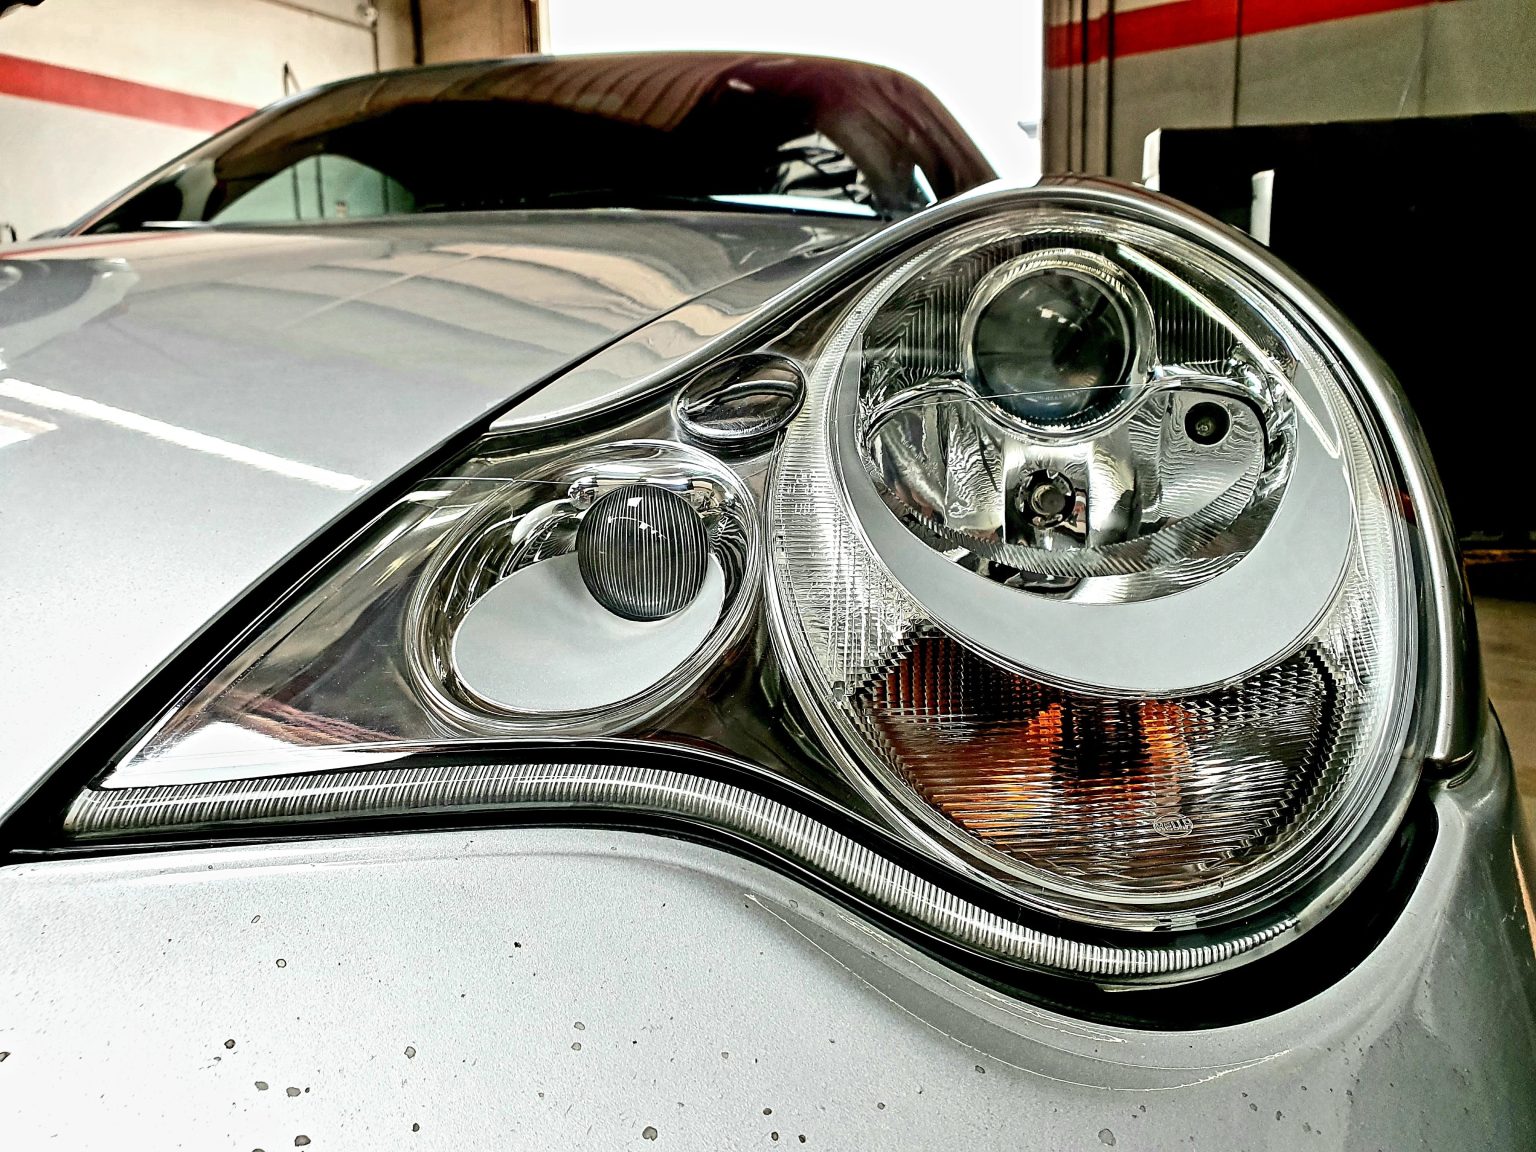 Brand New Headlights Fitted to a Car